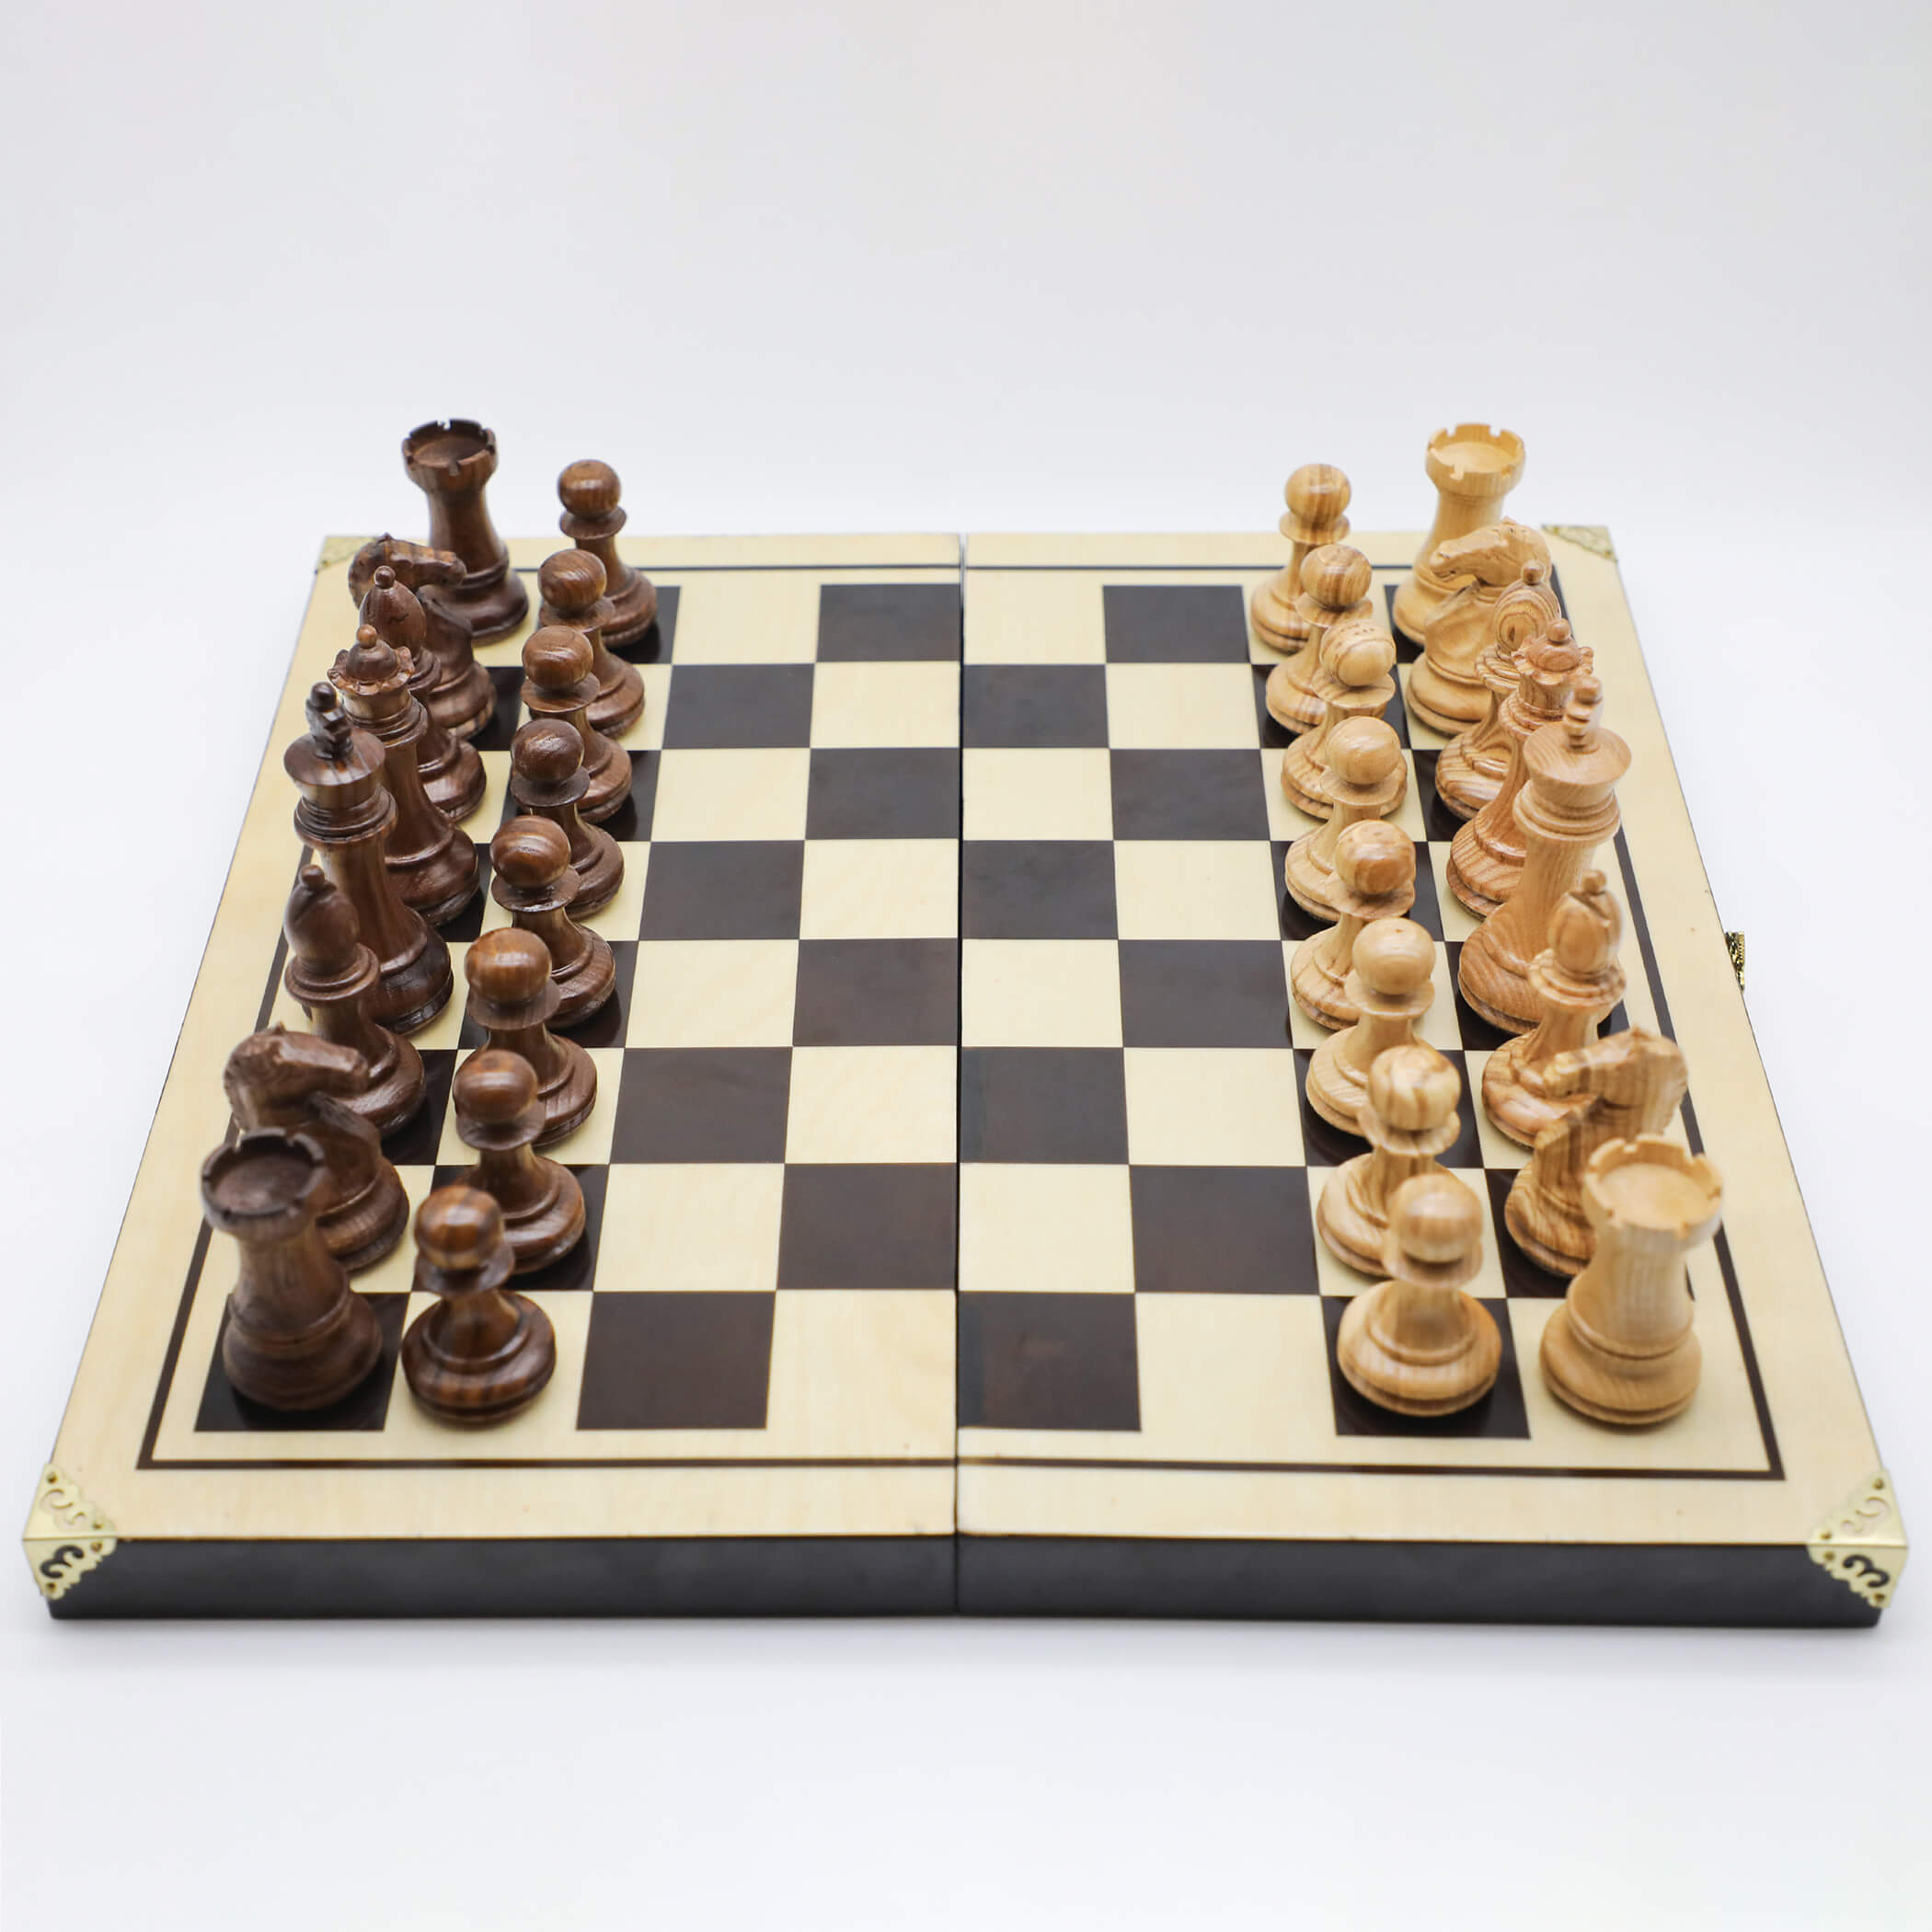 Standard Wooden Chess Pieces - Ash Wood